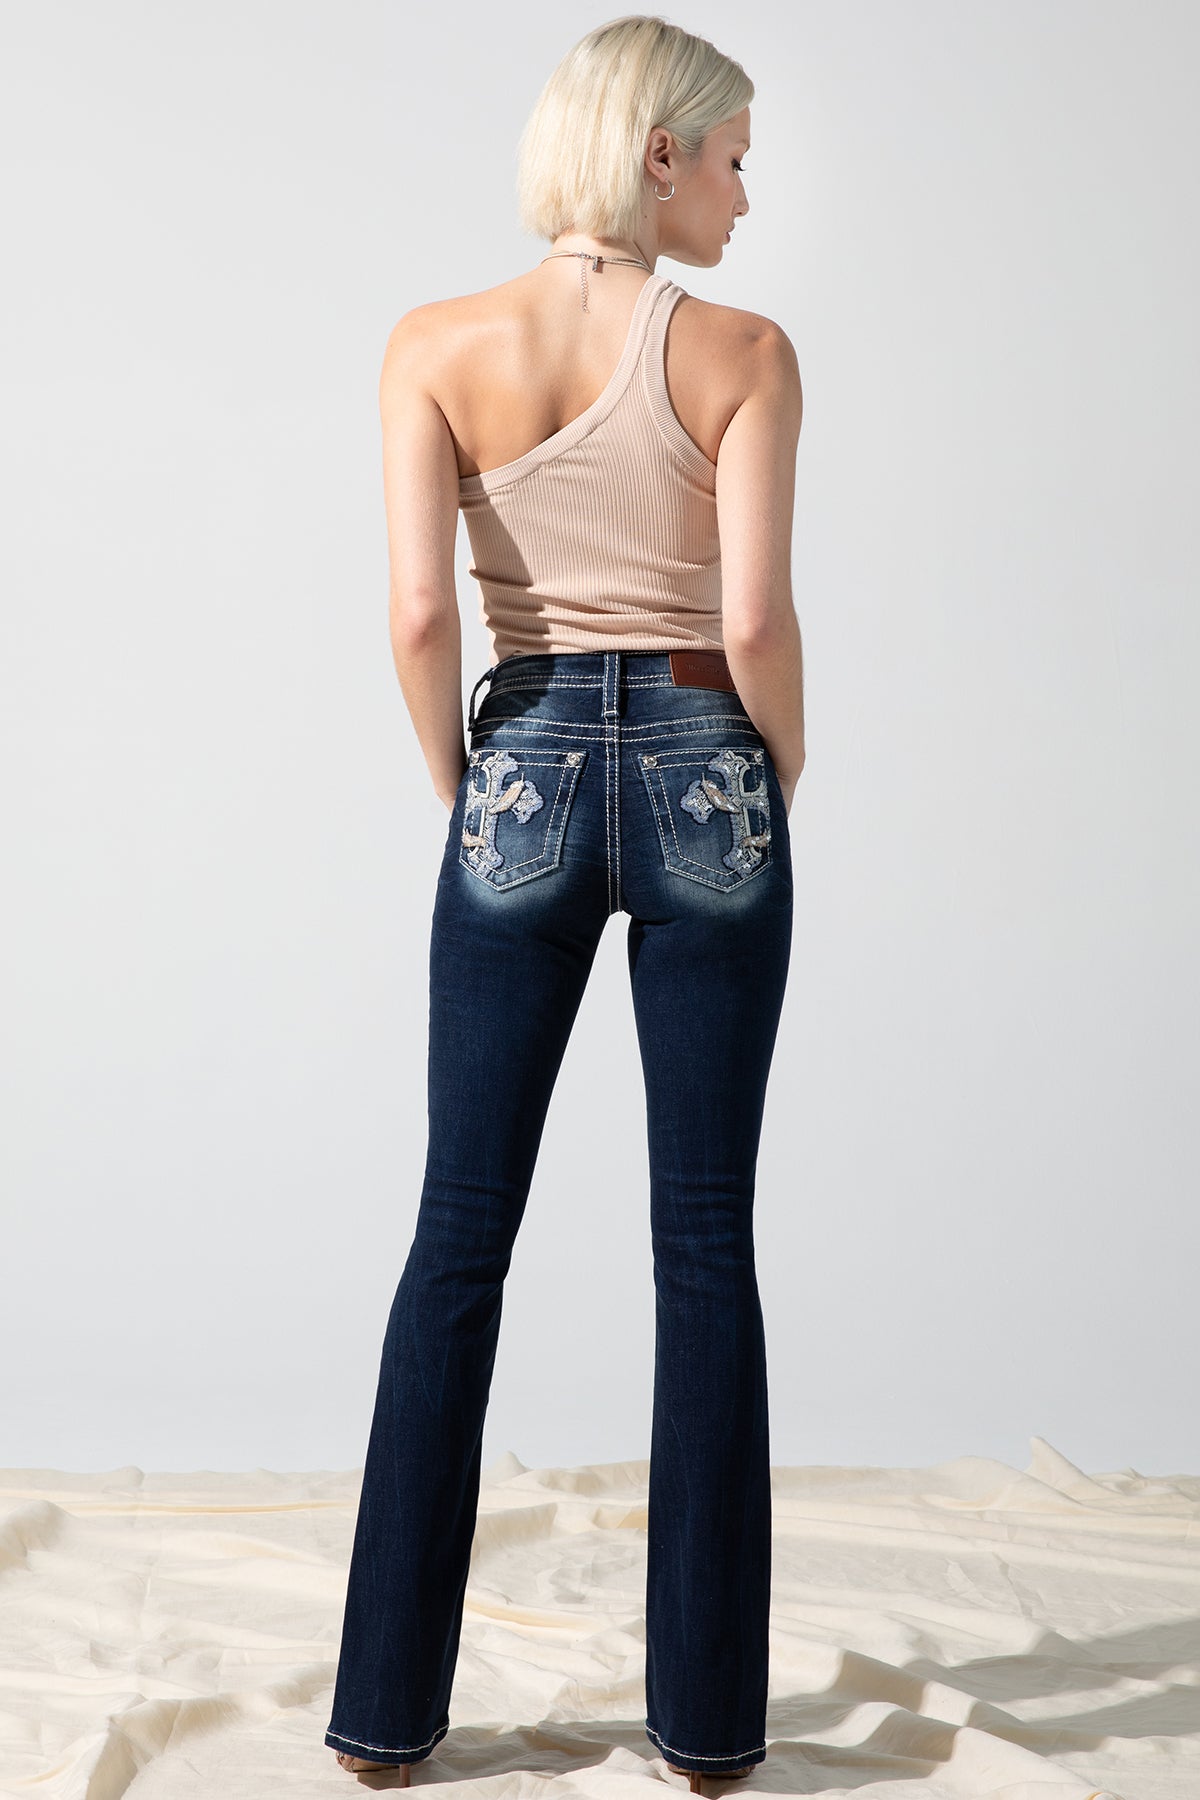 Feathered Cross Bootcut Jeans